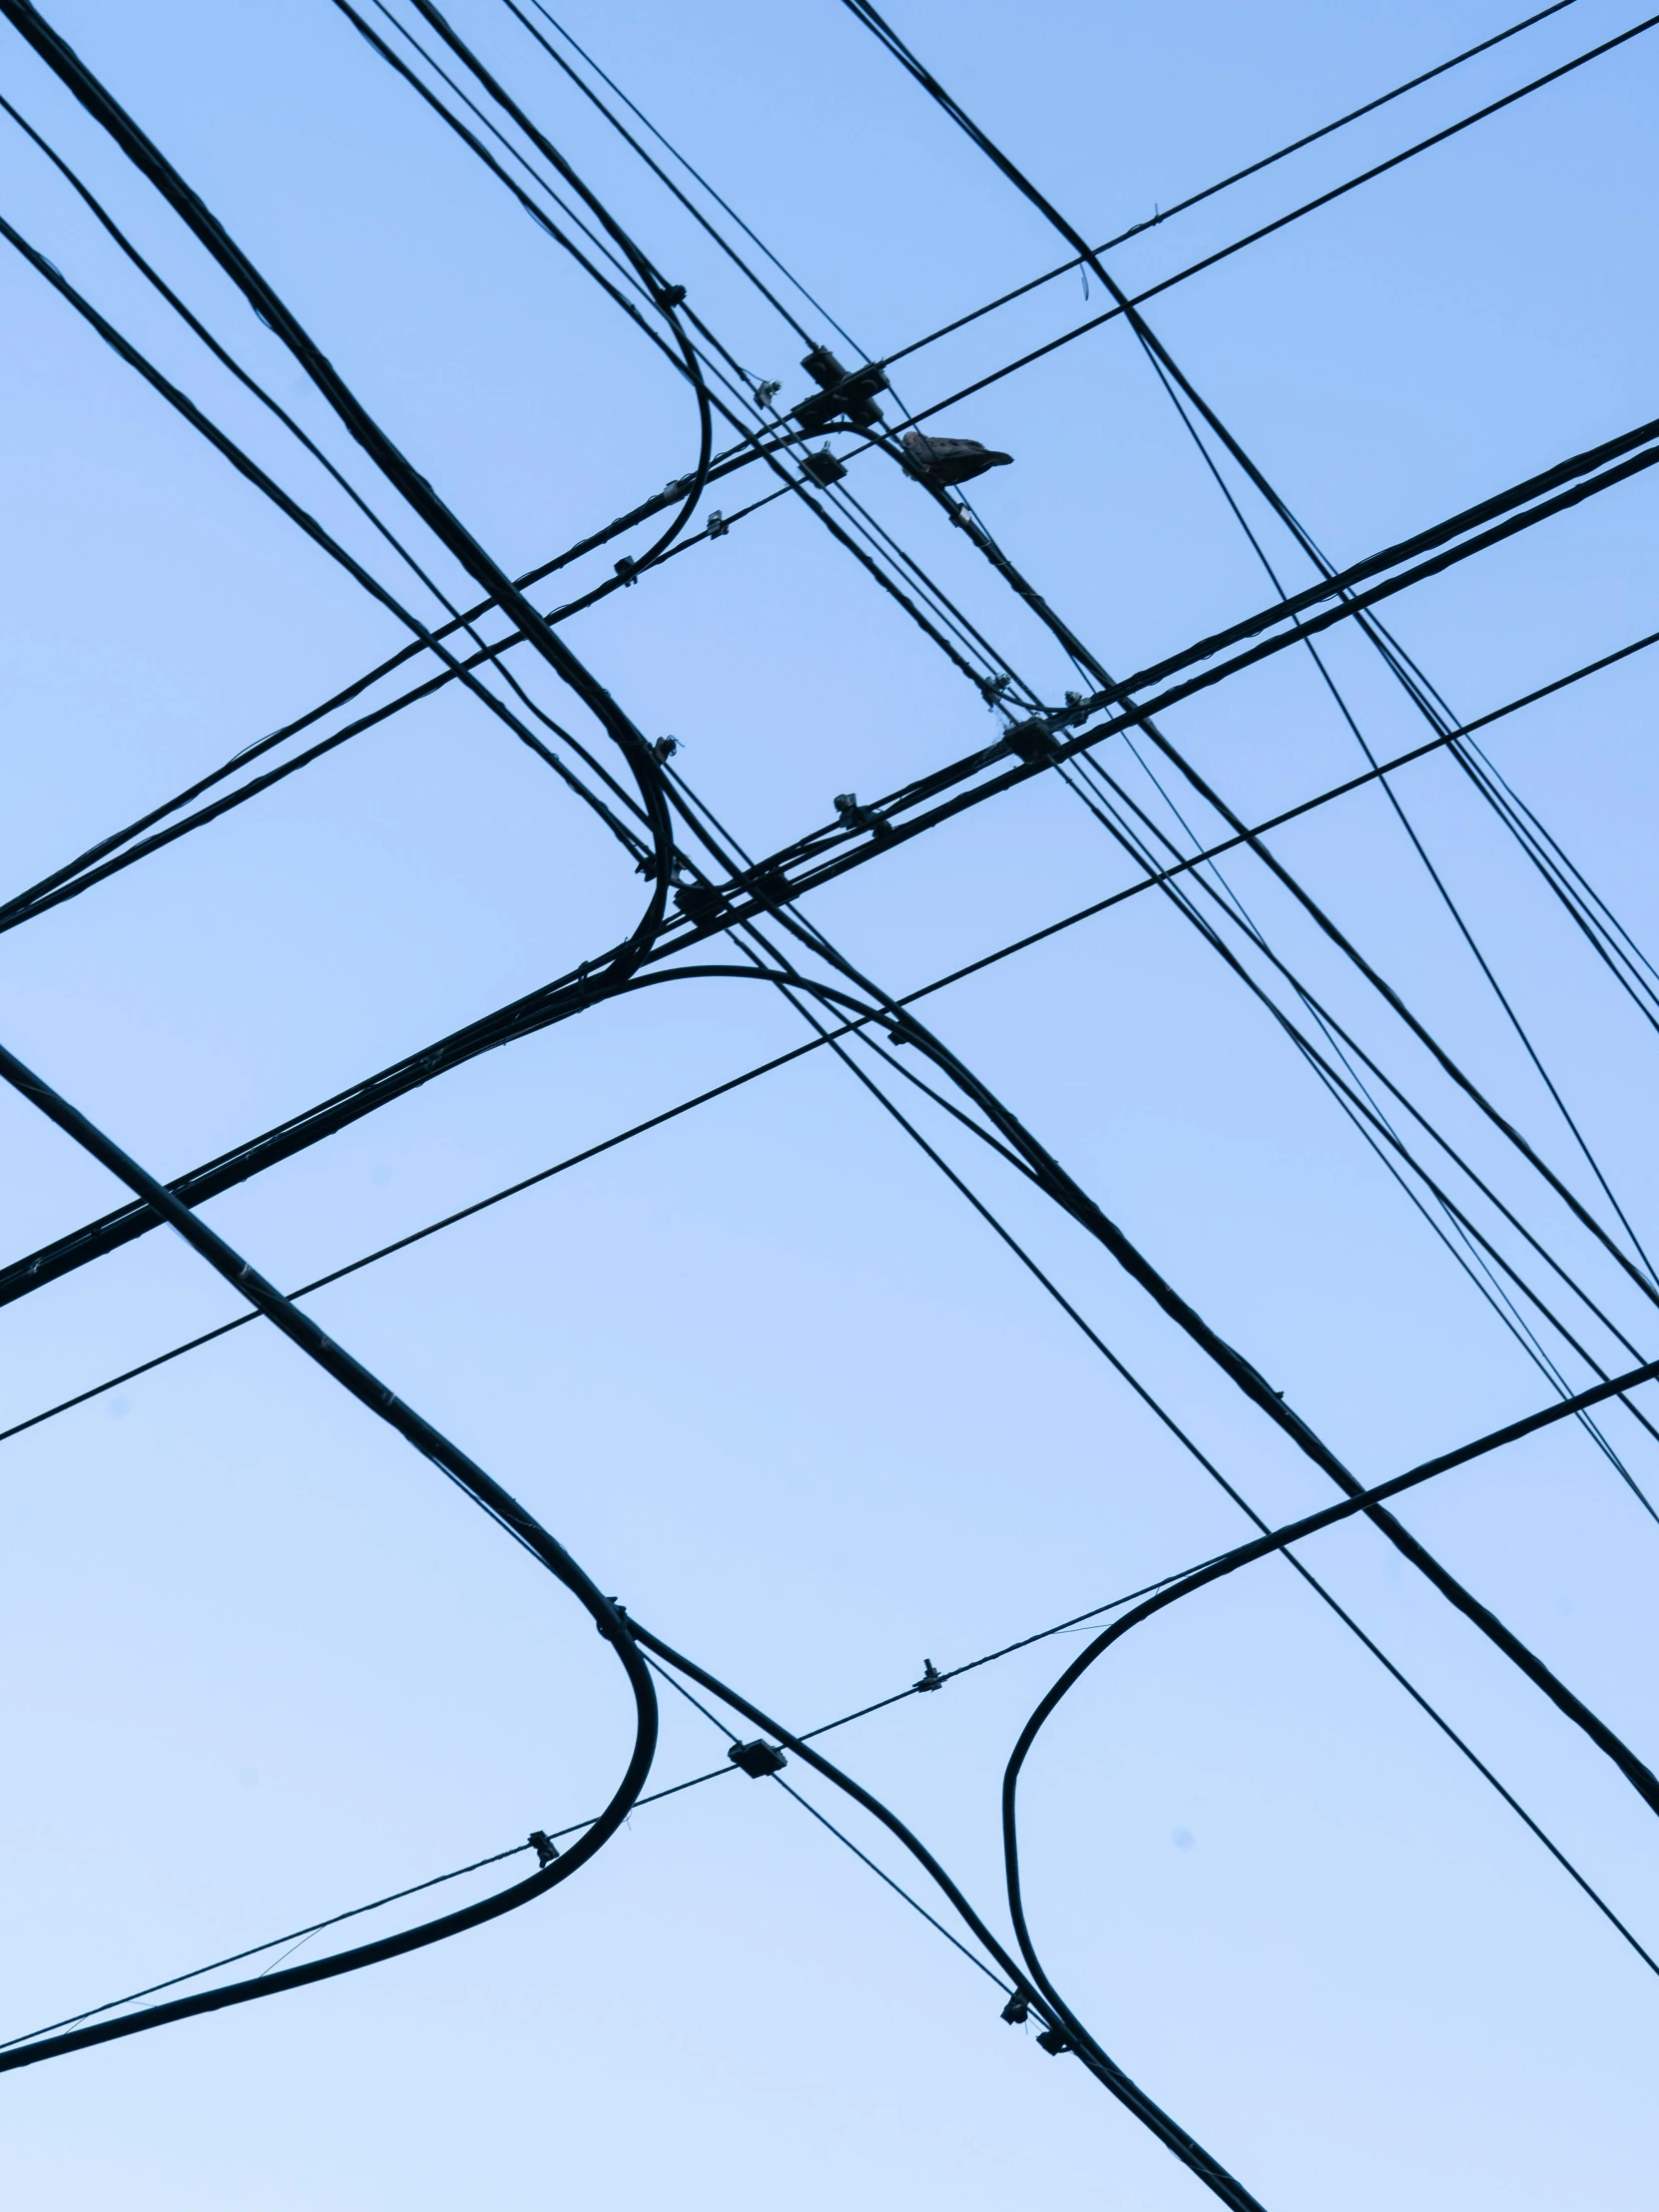 a bunch of power lines and wires against a blue sky, by Carey Morris, unsplash, complex ceiling, railways, ilustration, plain background